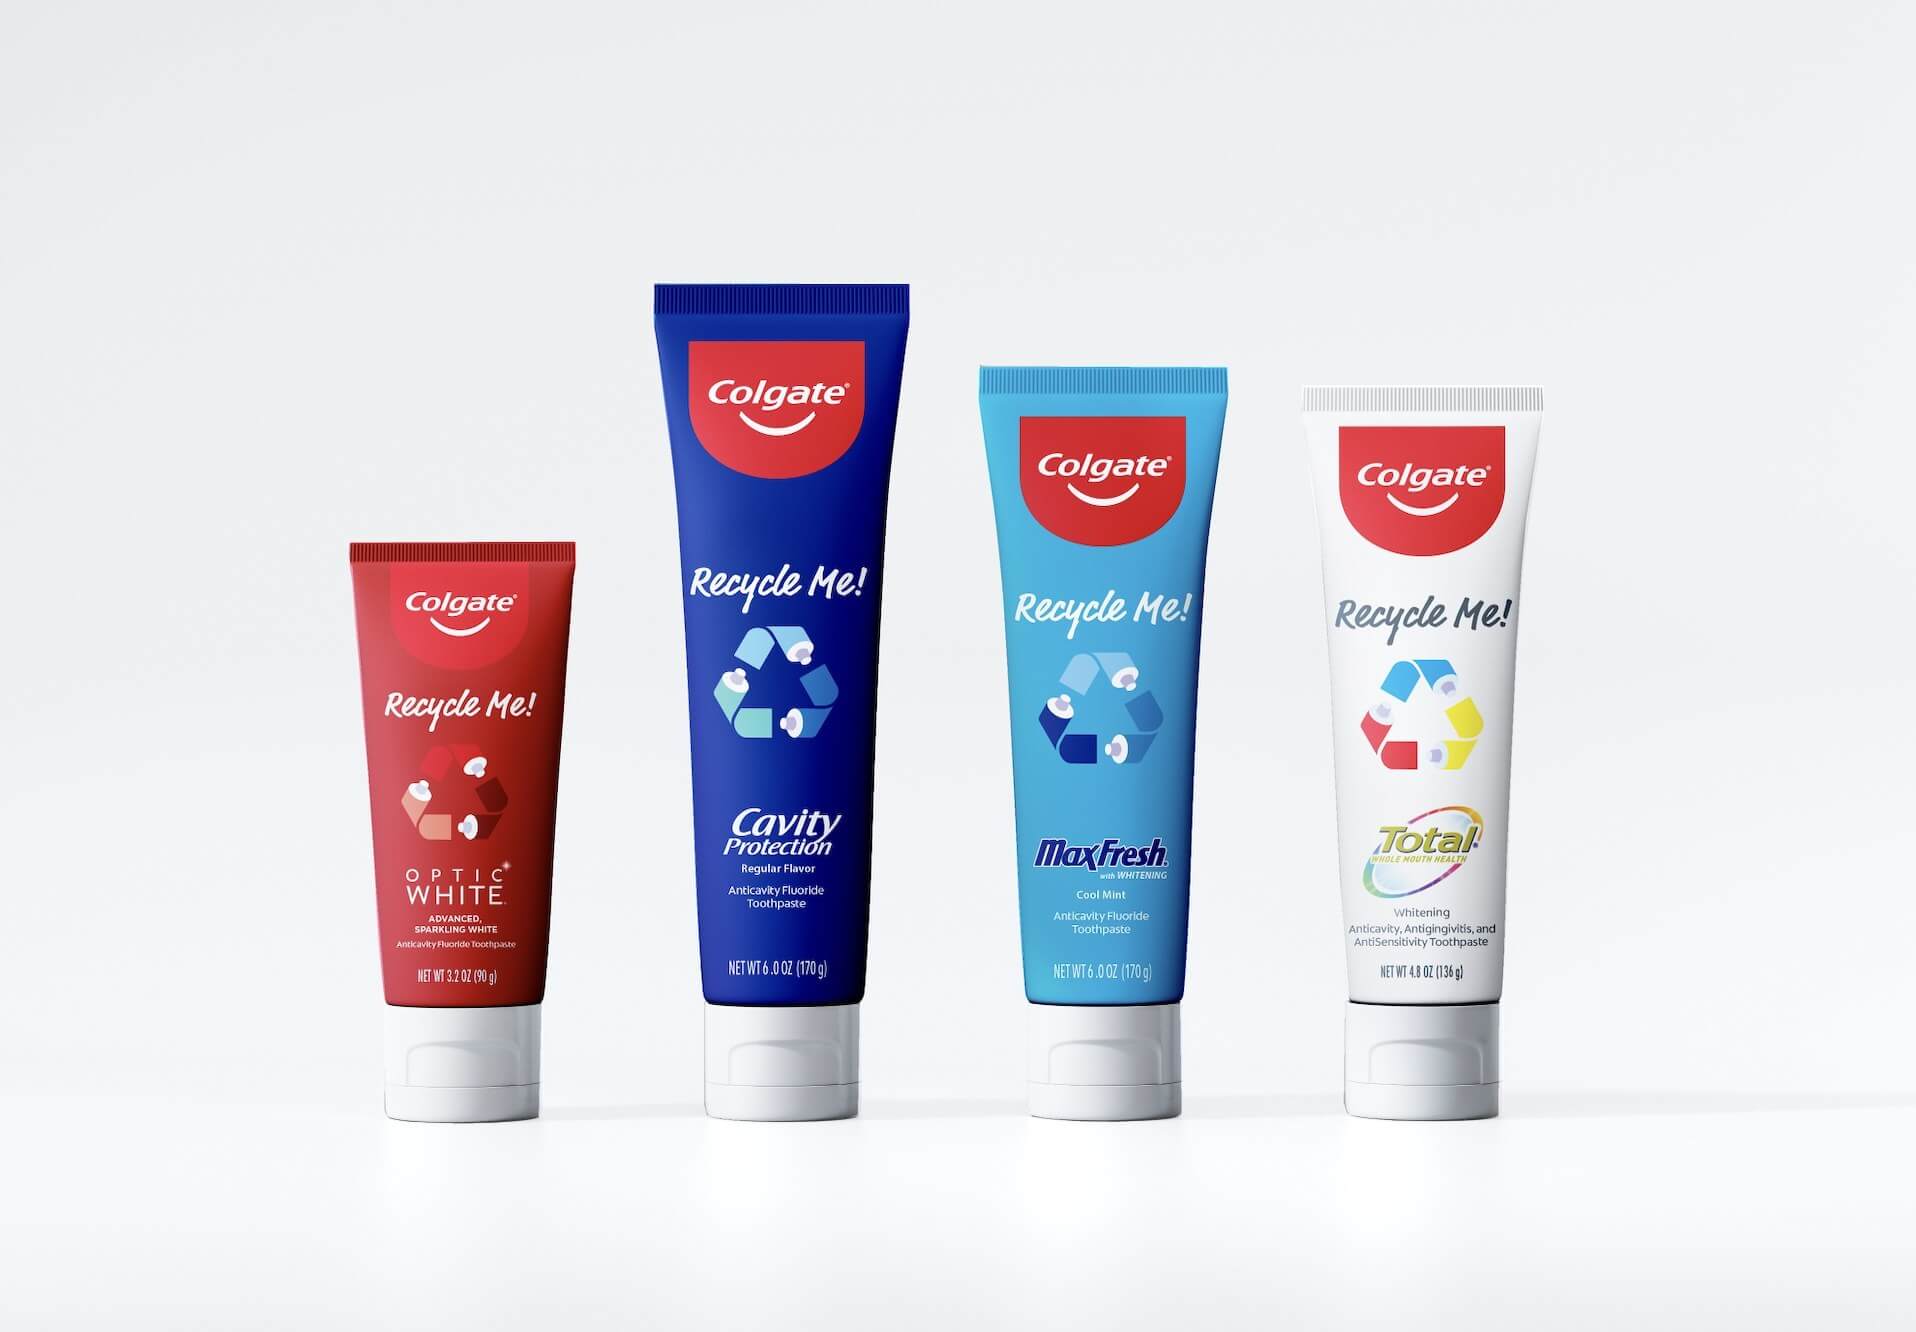 Colgate-Palmolive recycle me recyclable toothpaste tubes part of climate action strategy